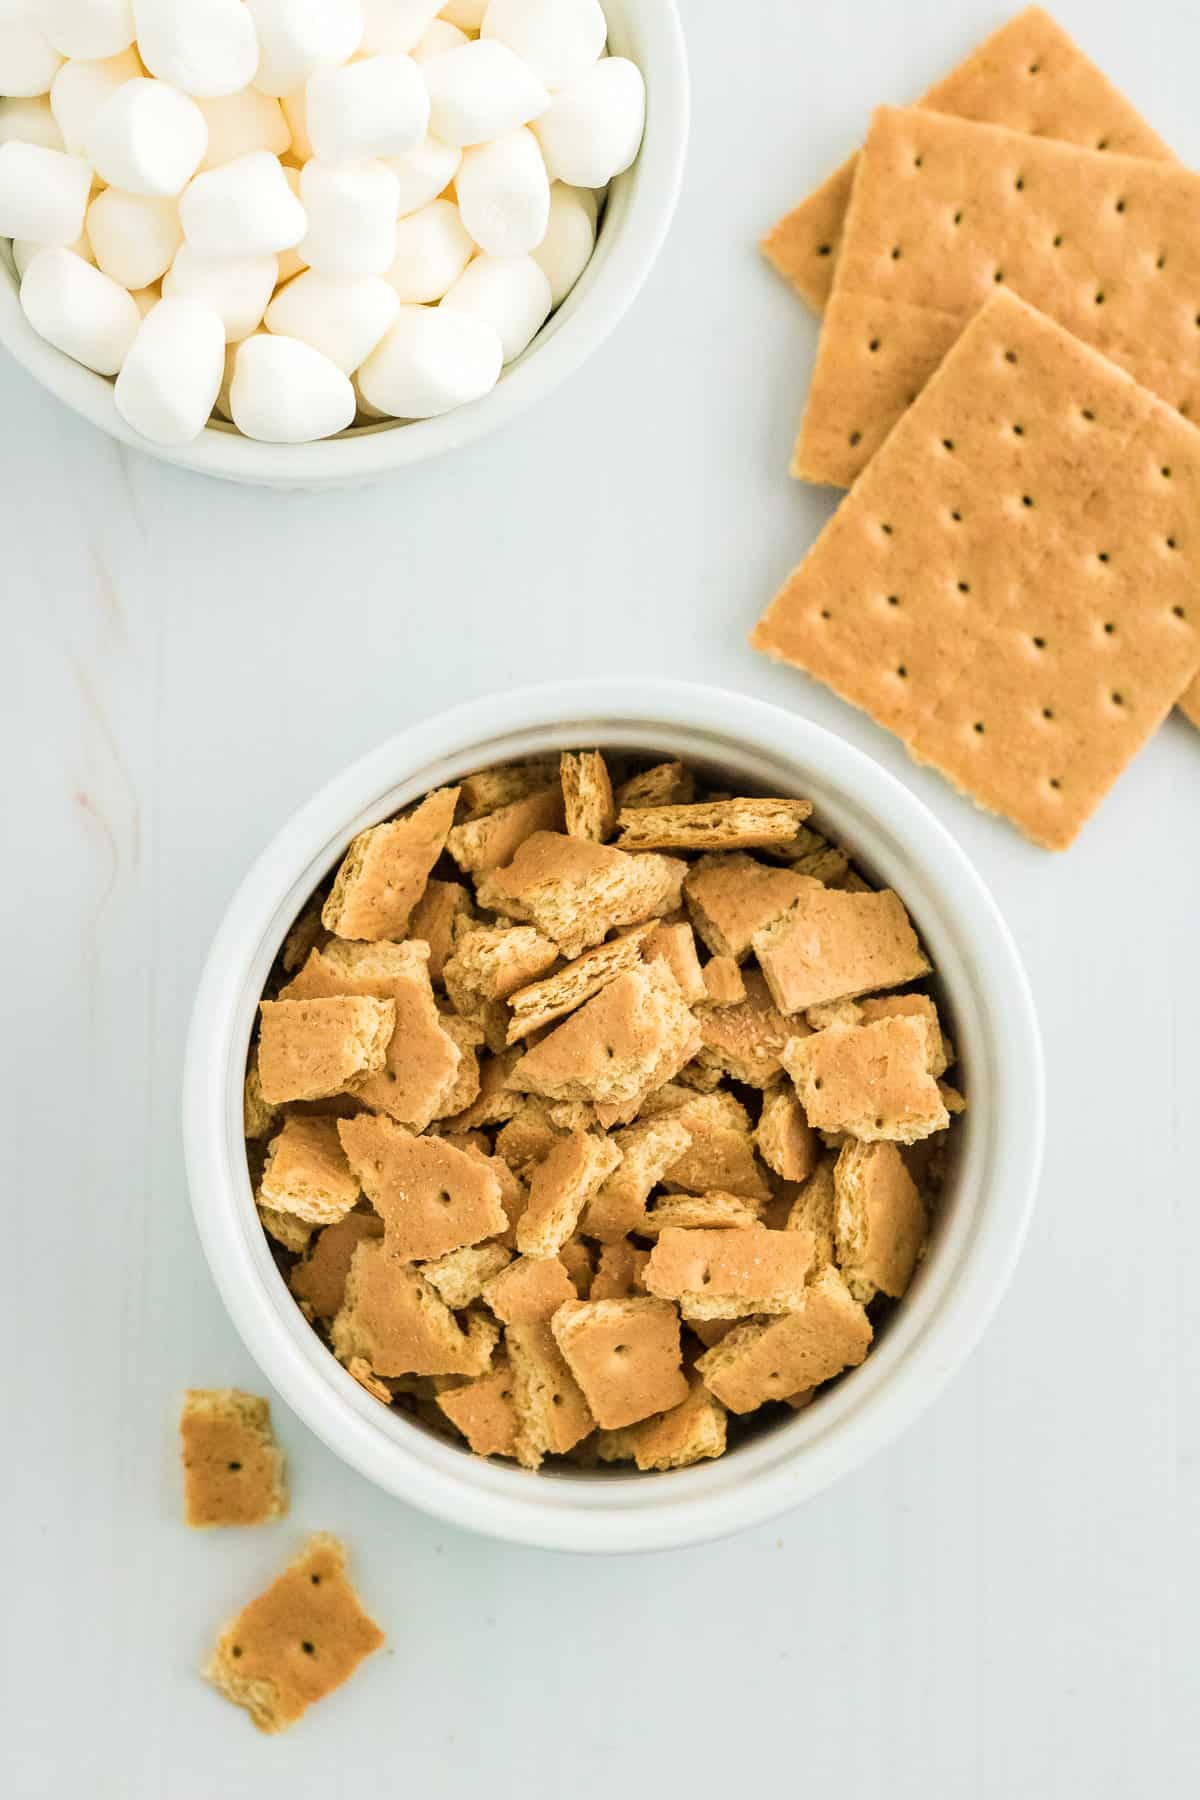 Break up the Graham crackers into small pieces